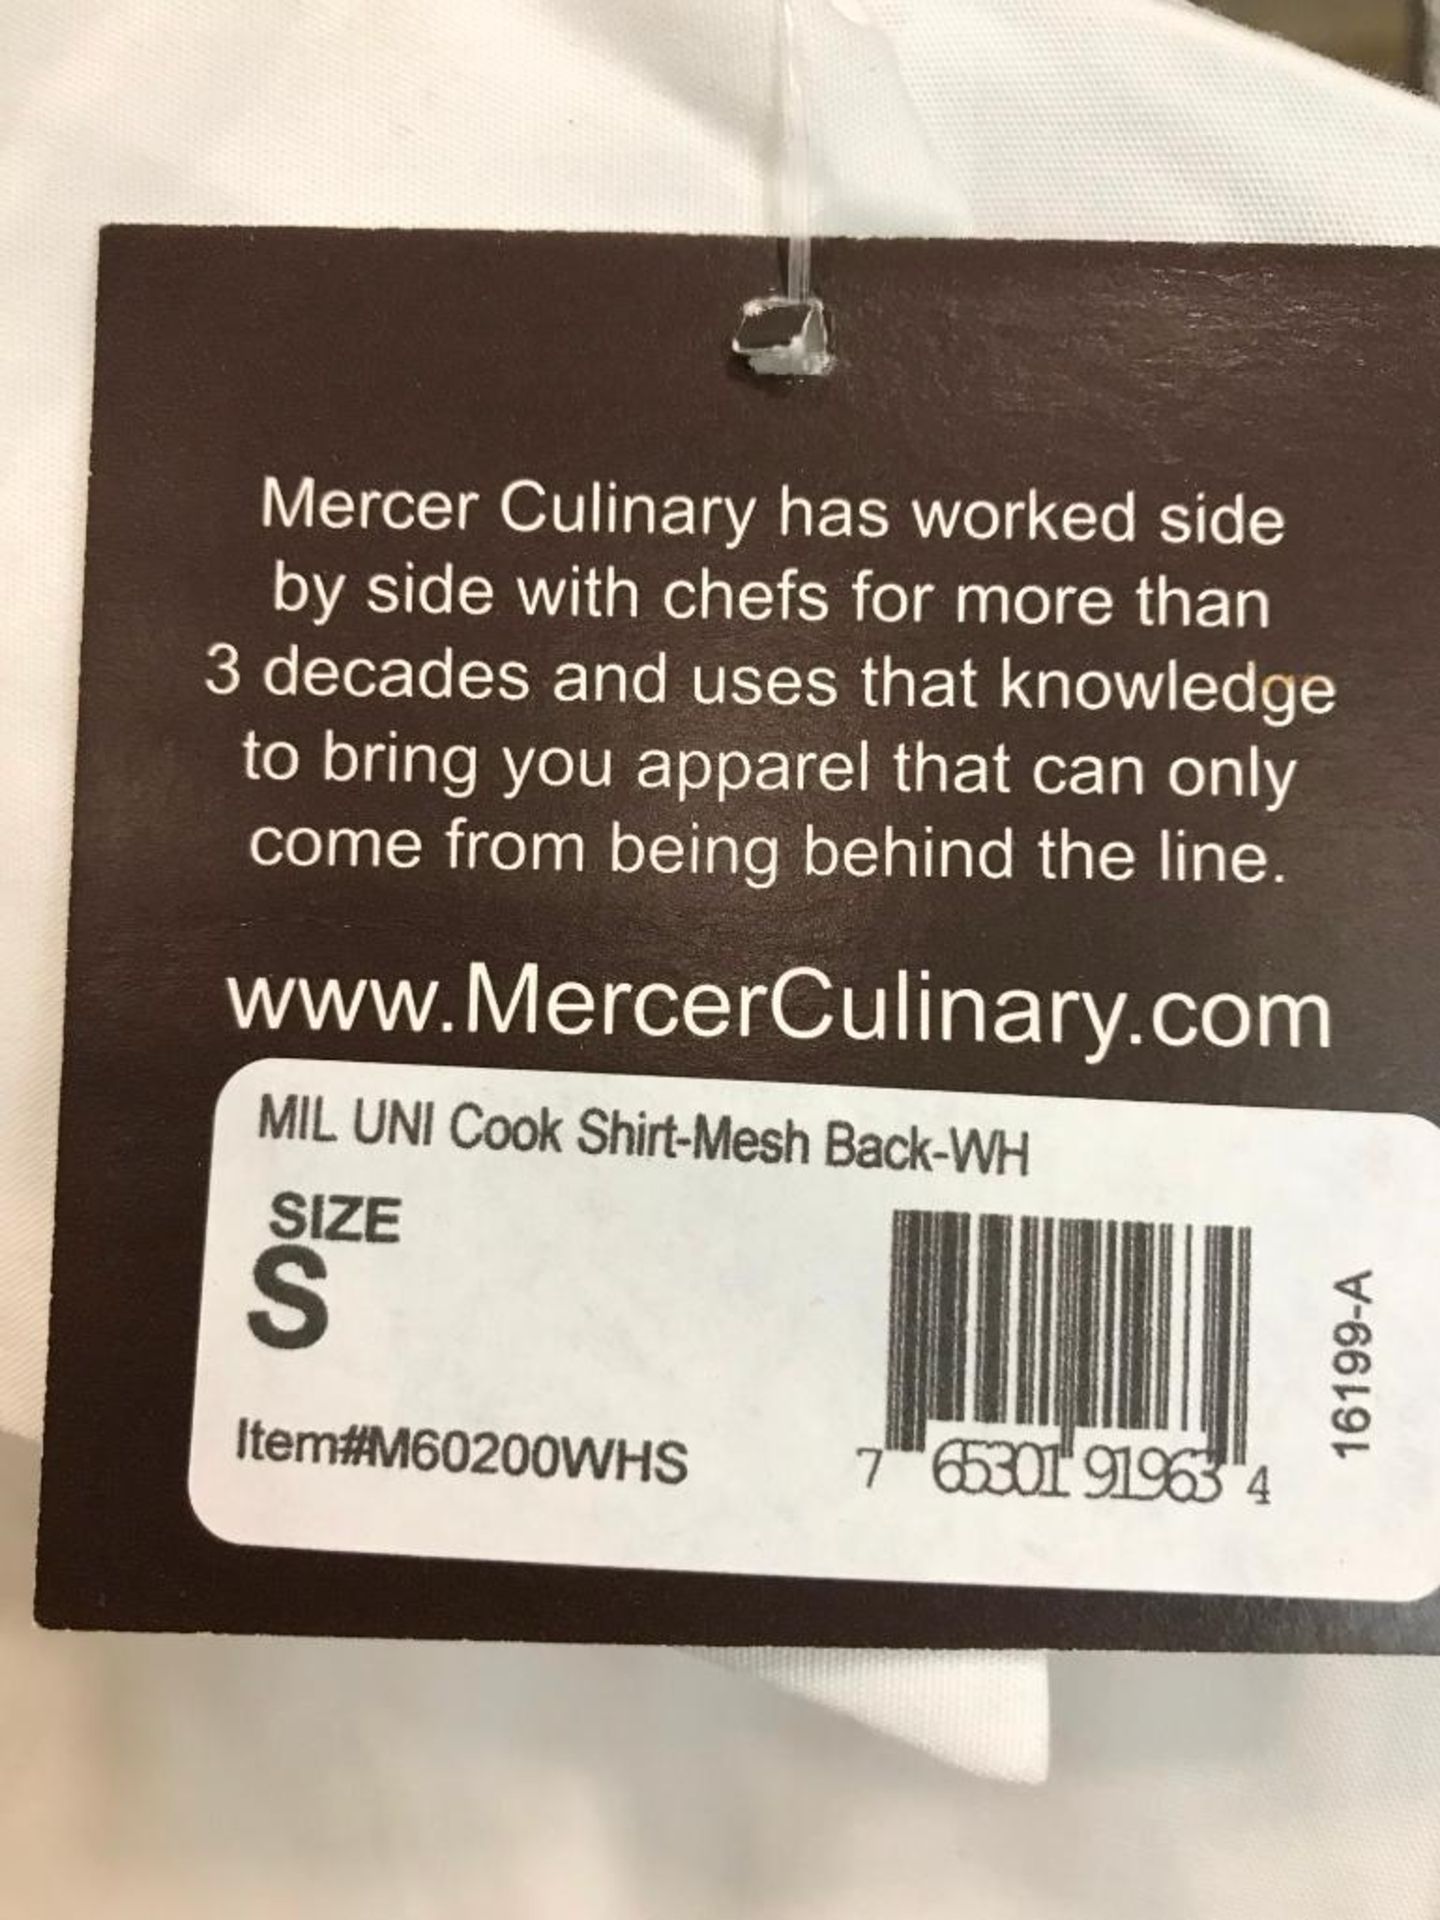 MERCER CULINARY MIL UNI COOK SHIRT-MESH BACK WHITE SIZE SMALL - M60200WHS - Image 2 of 3